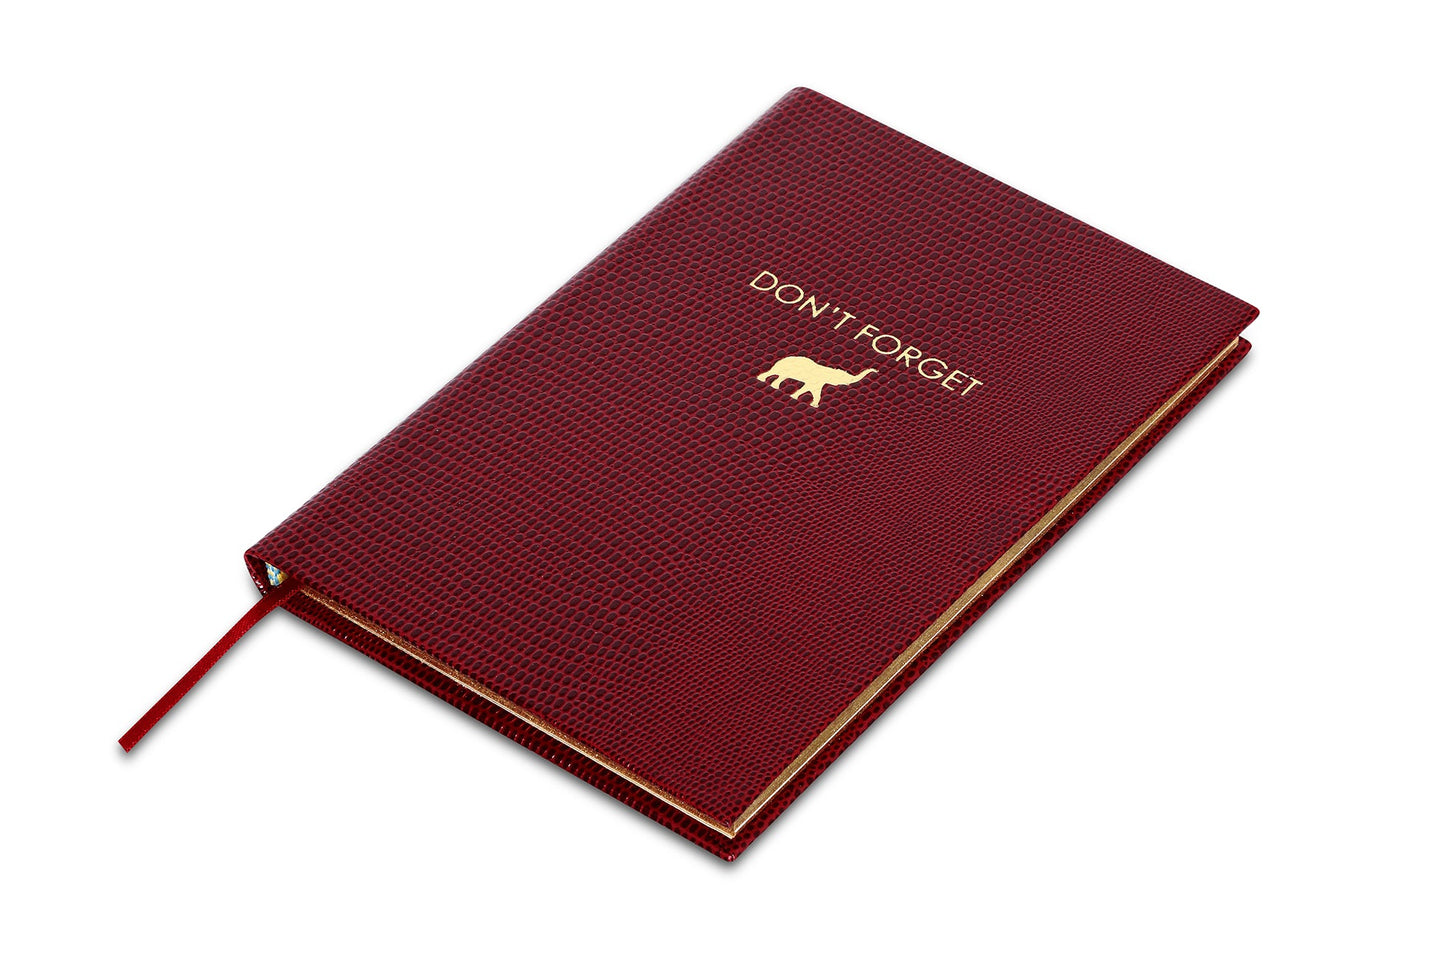 HARDCOVER NOTEBOOK NO°34 - DON'T FORGET